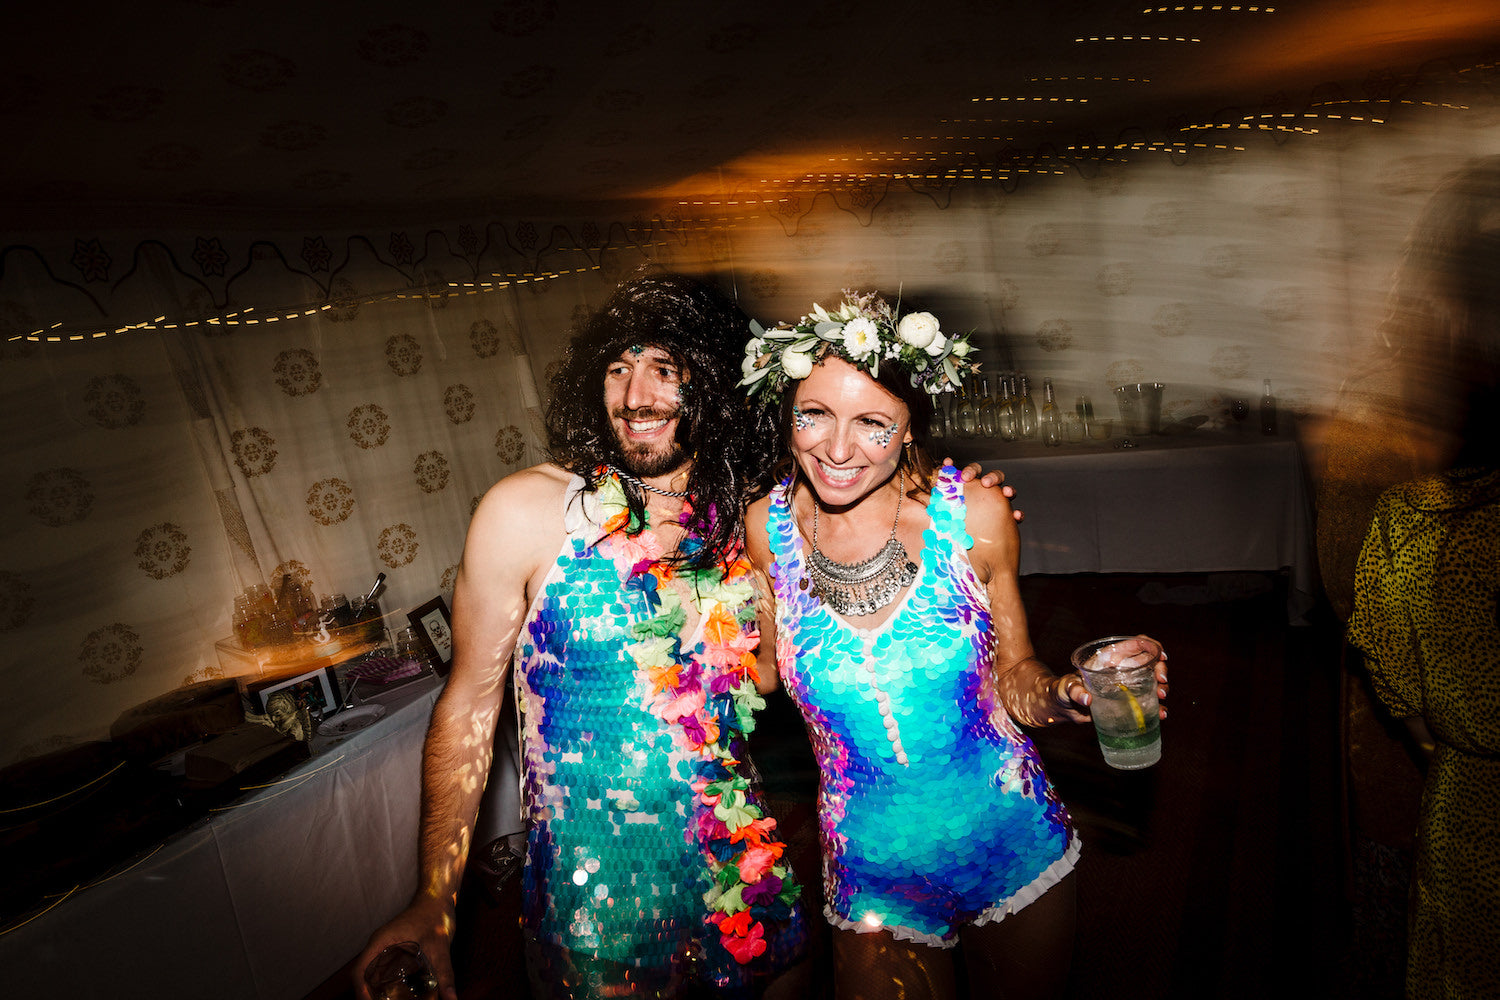 A bride wearing a white sequin playsuit poses with a male wedding guest wearing a sequin dress and a long black wig.